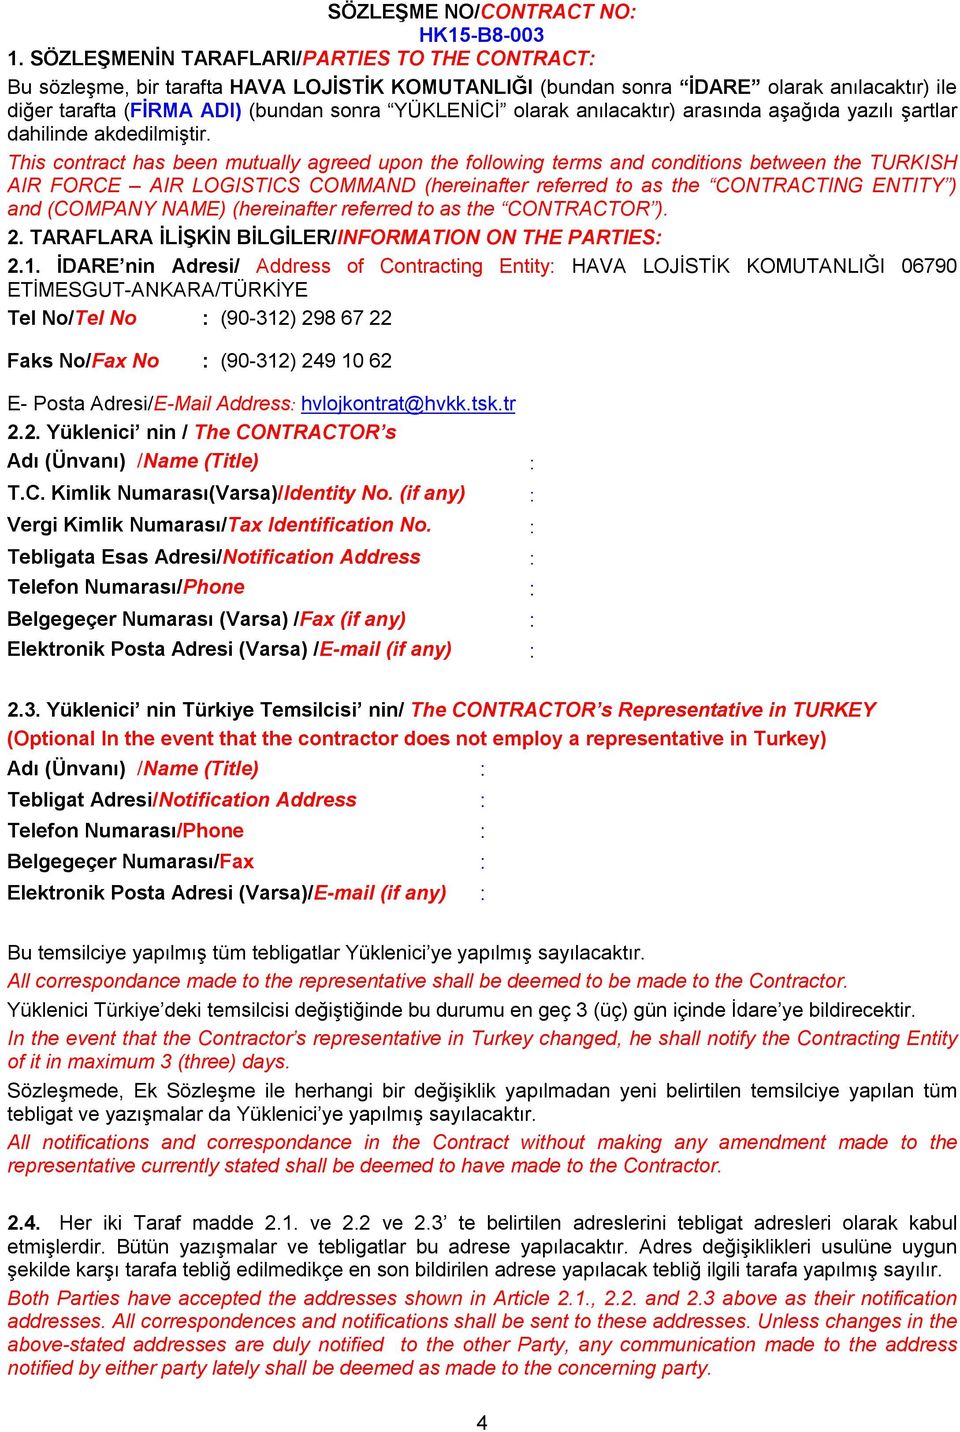 This contract has been mutually agreed upon the following terms and conditions between the TURKISH AIR FORCE AIR LOGISTICS COMMAND (hereinafter referred to as the CONTRACTING ENTITY ) and (COMPANY